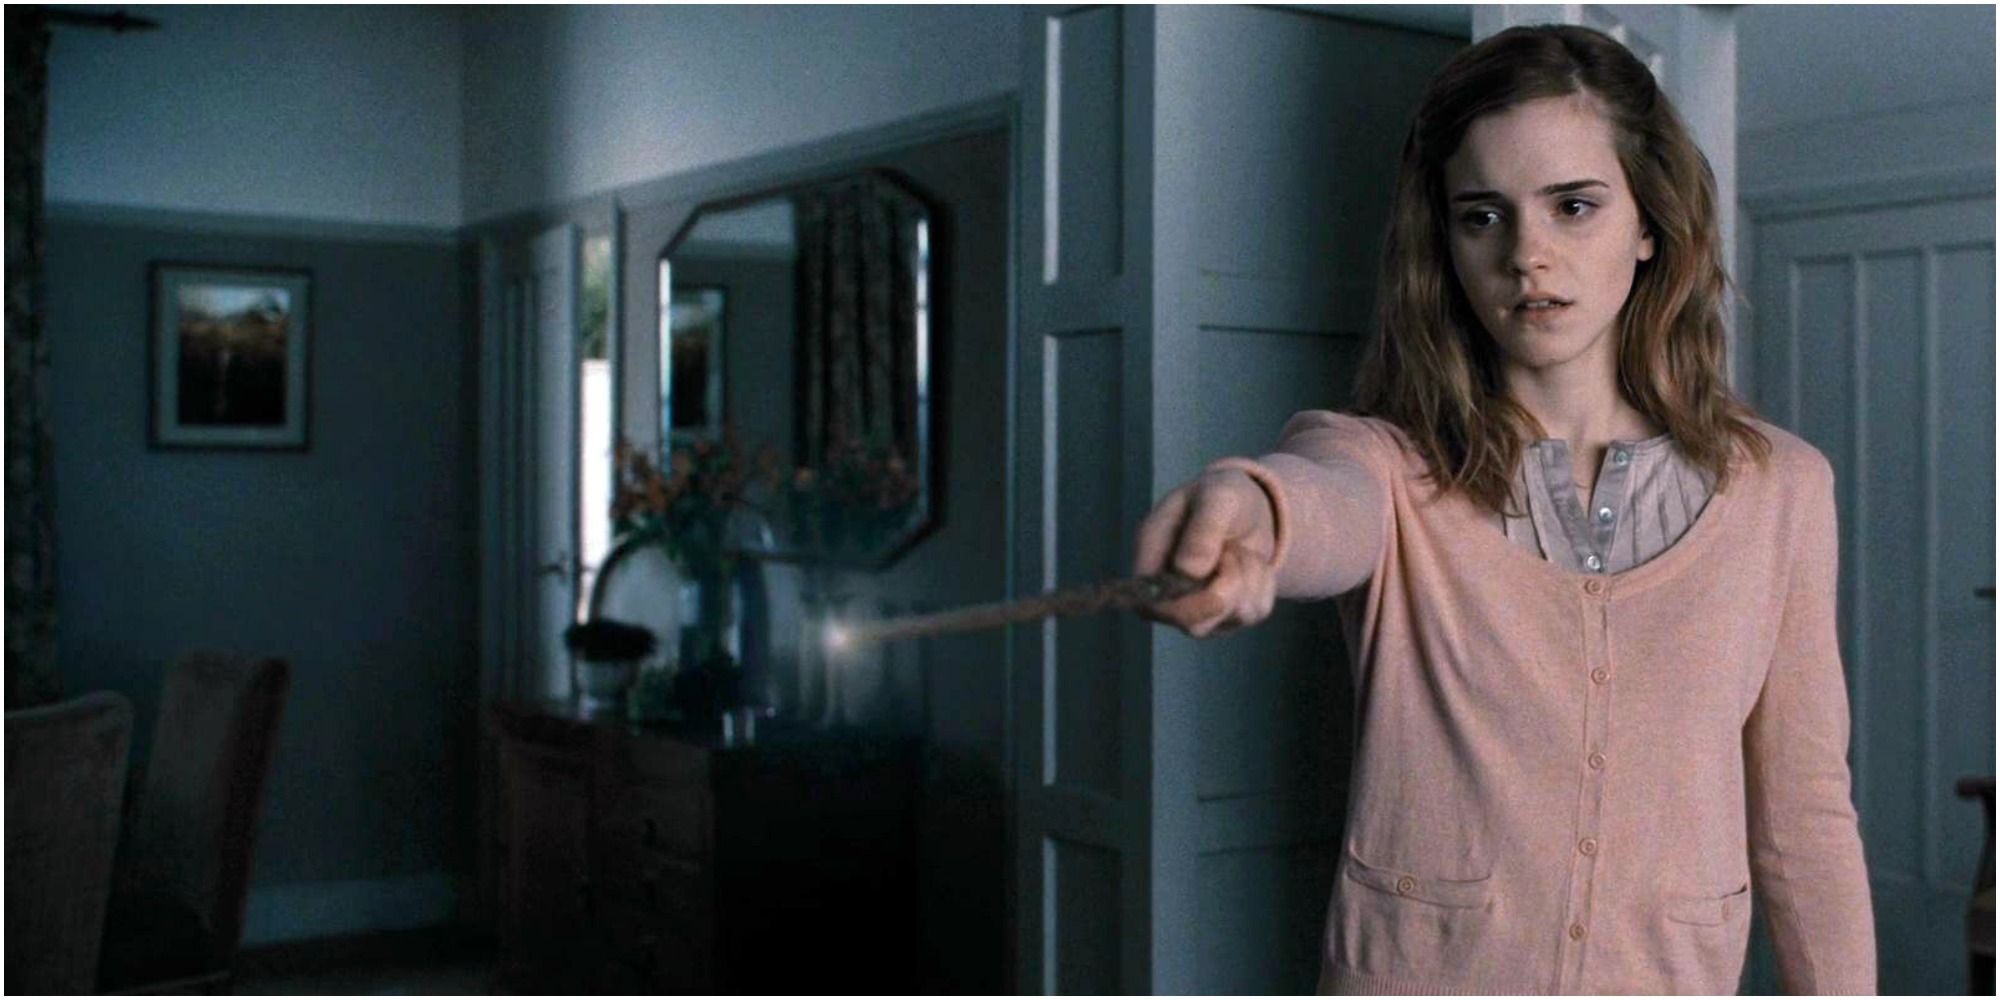 Harry Potter 10 Things About Hermione The Movies Deliberately Changed